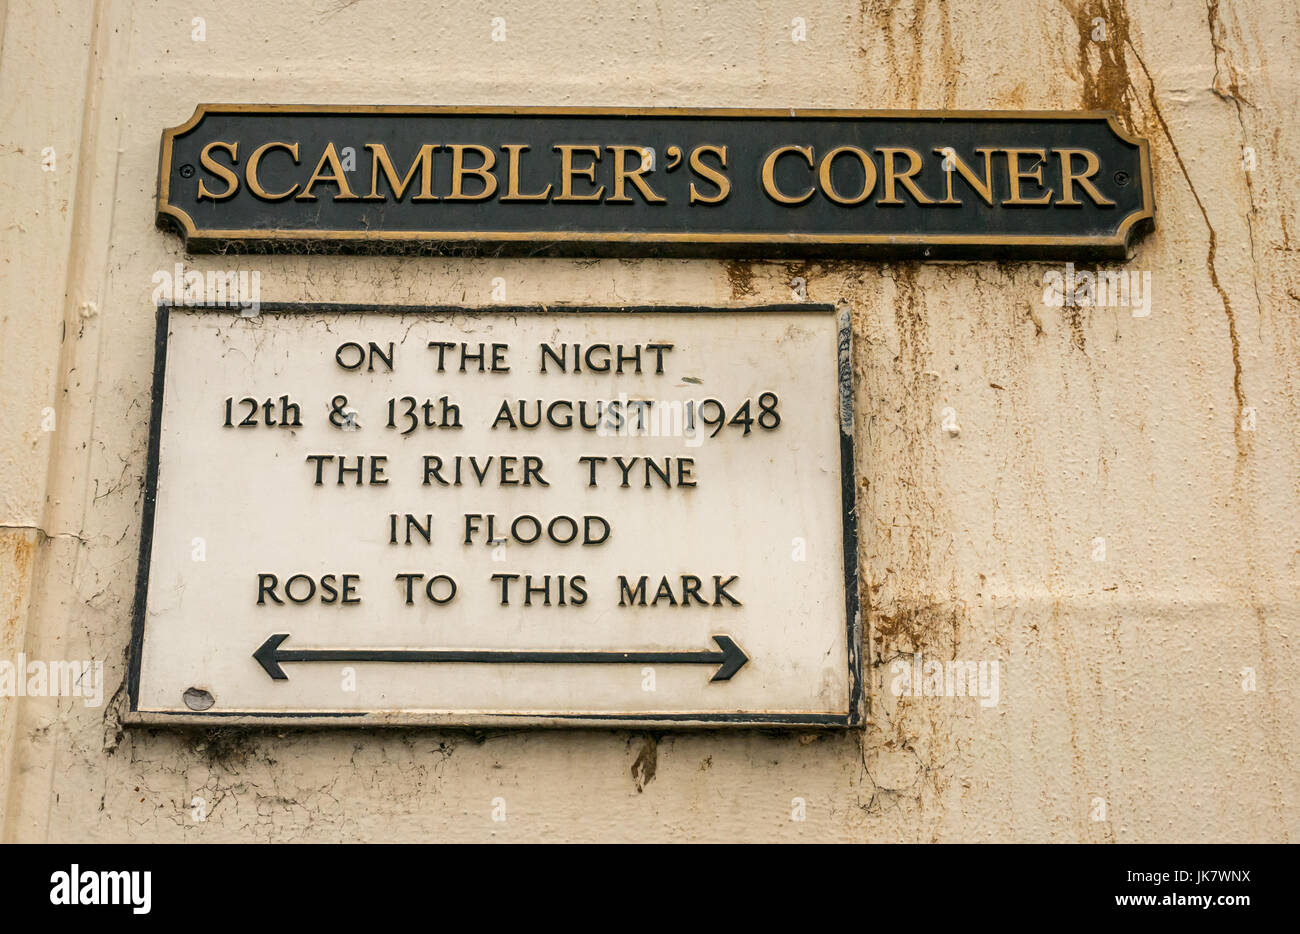 Information sign at Scambler's Corner, Haddington, Scotland, UK, indicating flood height in August 1948 when River Tyne flooded Stock Photo